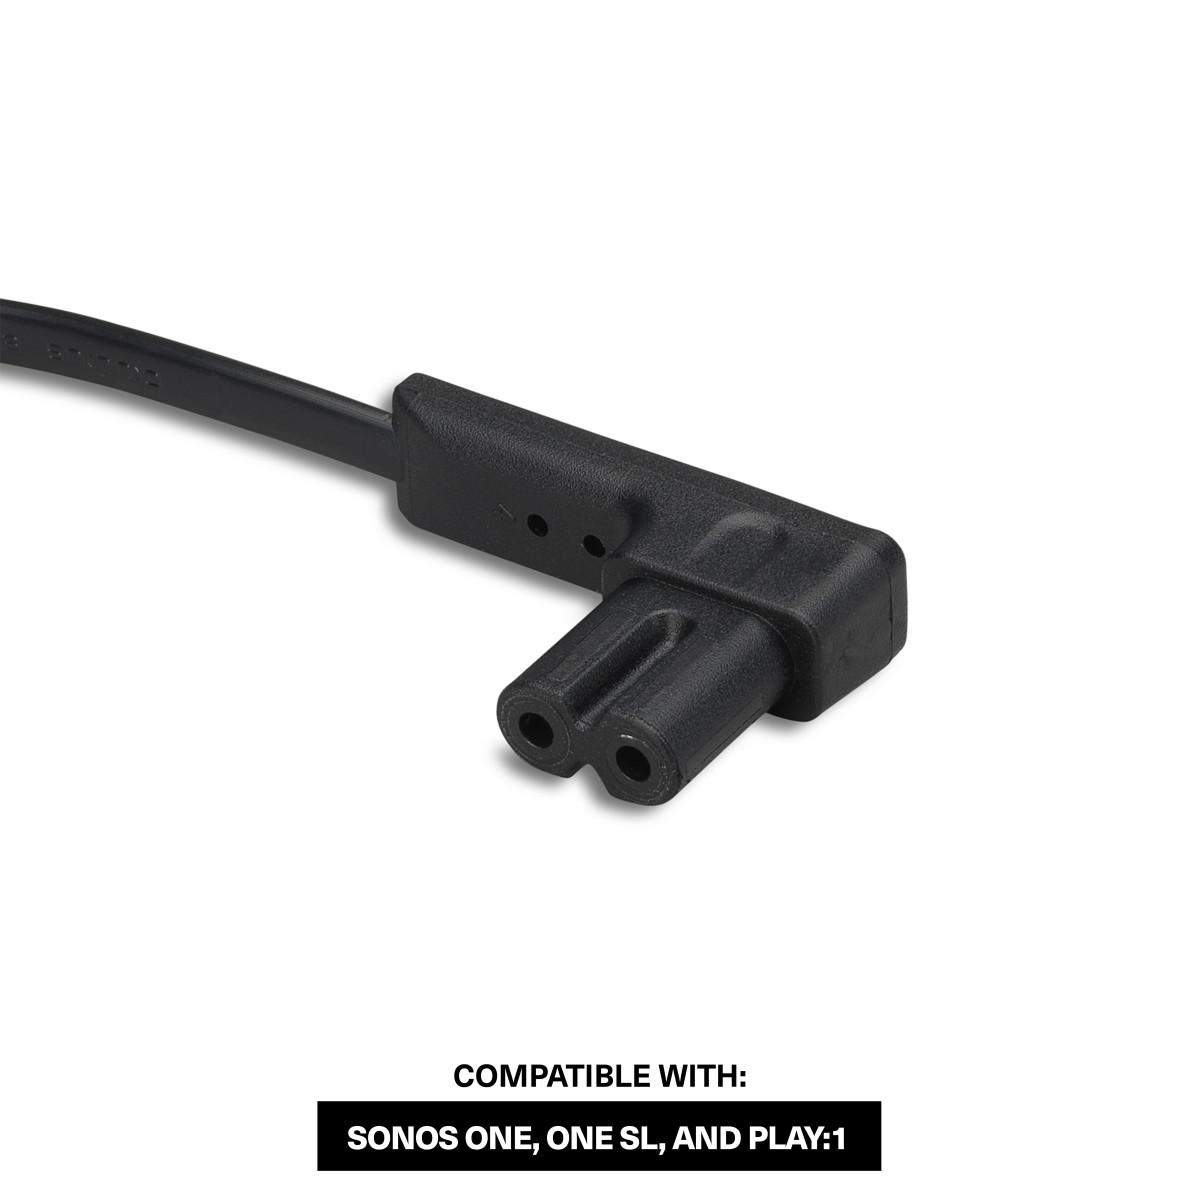 5m Power Cable Right Angled UK Black